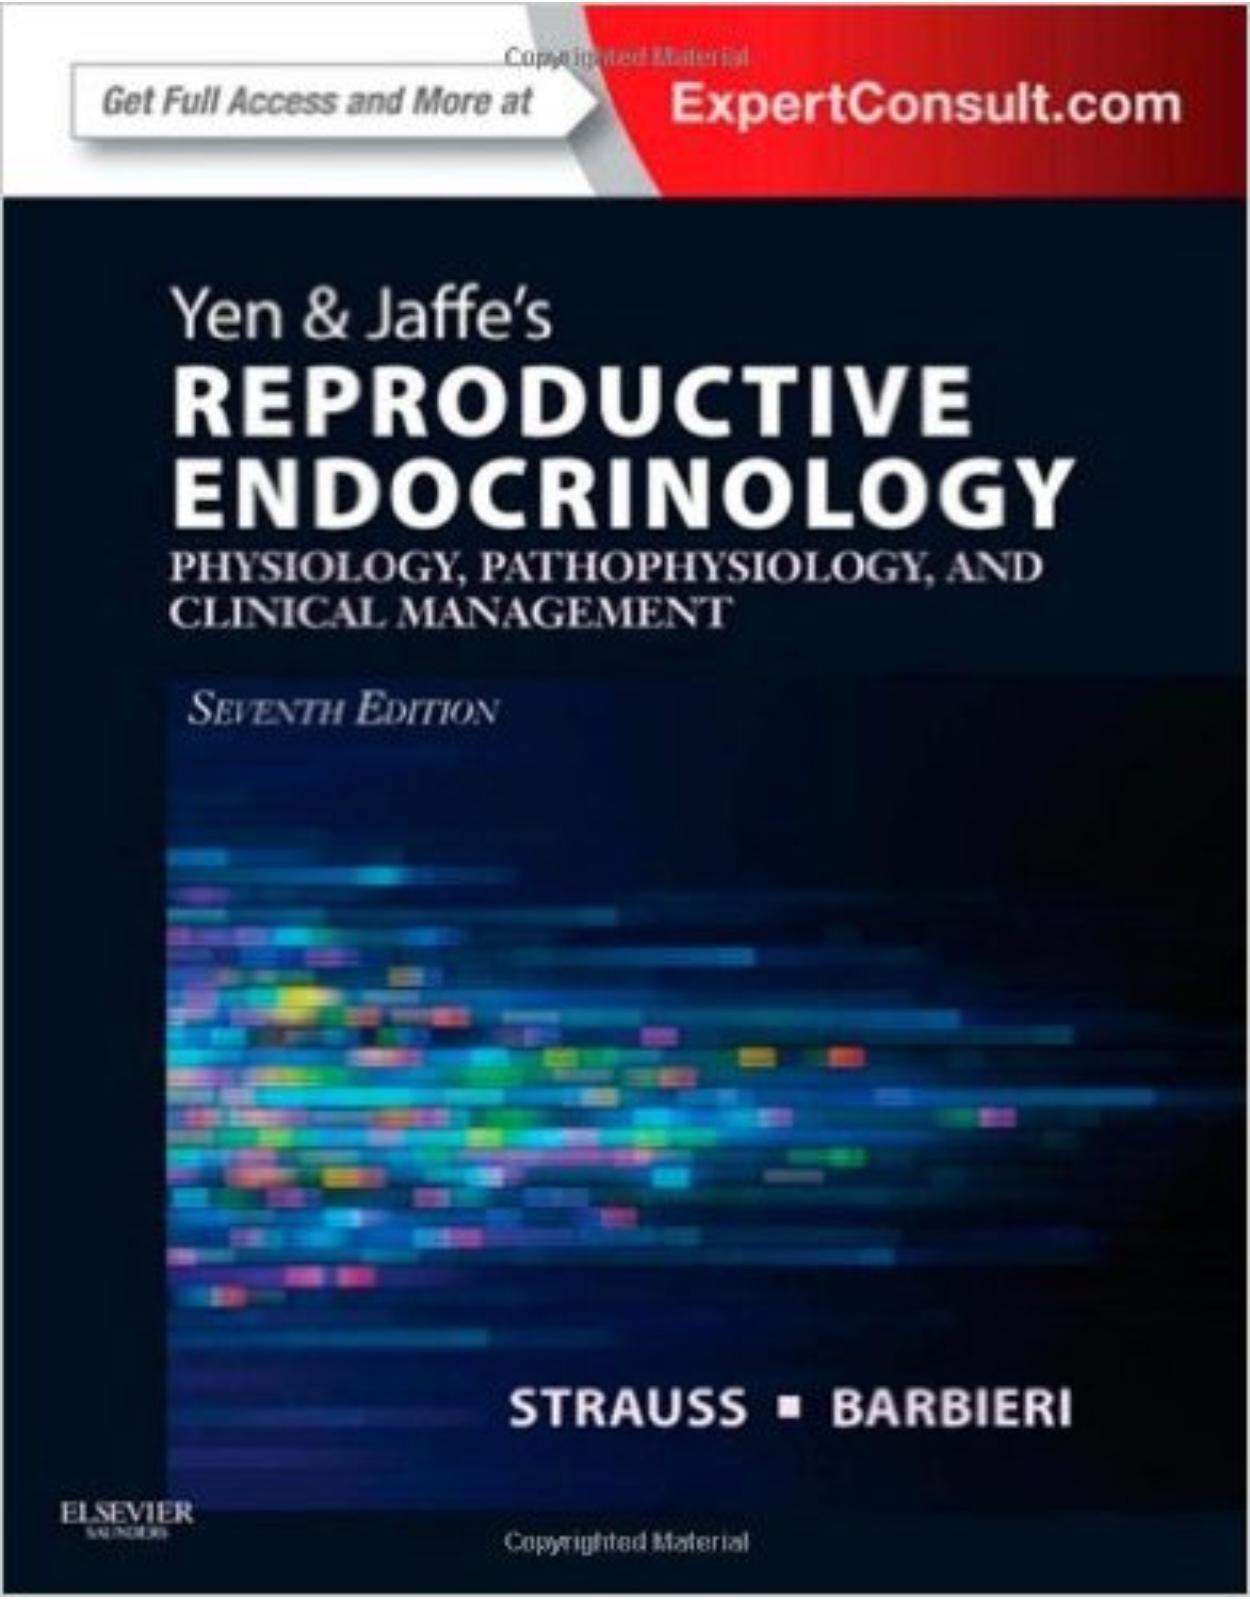 Yen & Jaffe's Reproductive Endocrinology: Physiology, Pathophysiology, and Clinical Management (Expert Consult - Online and Print), 7e